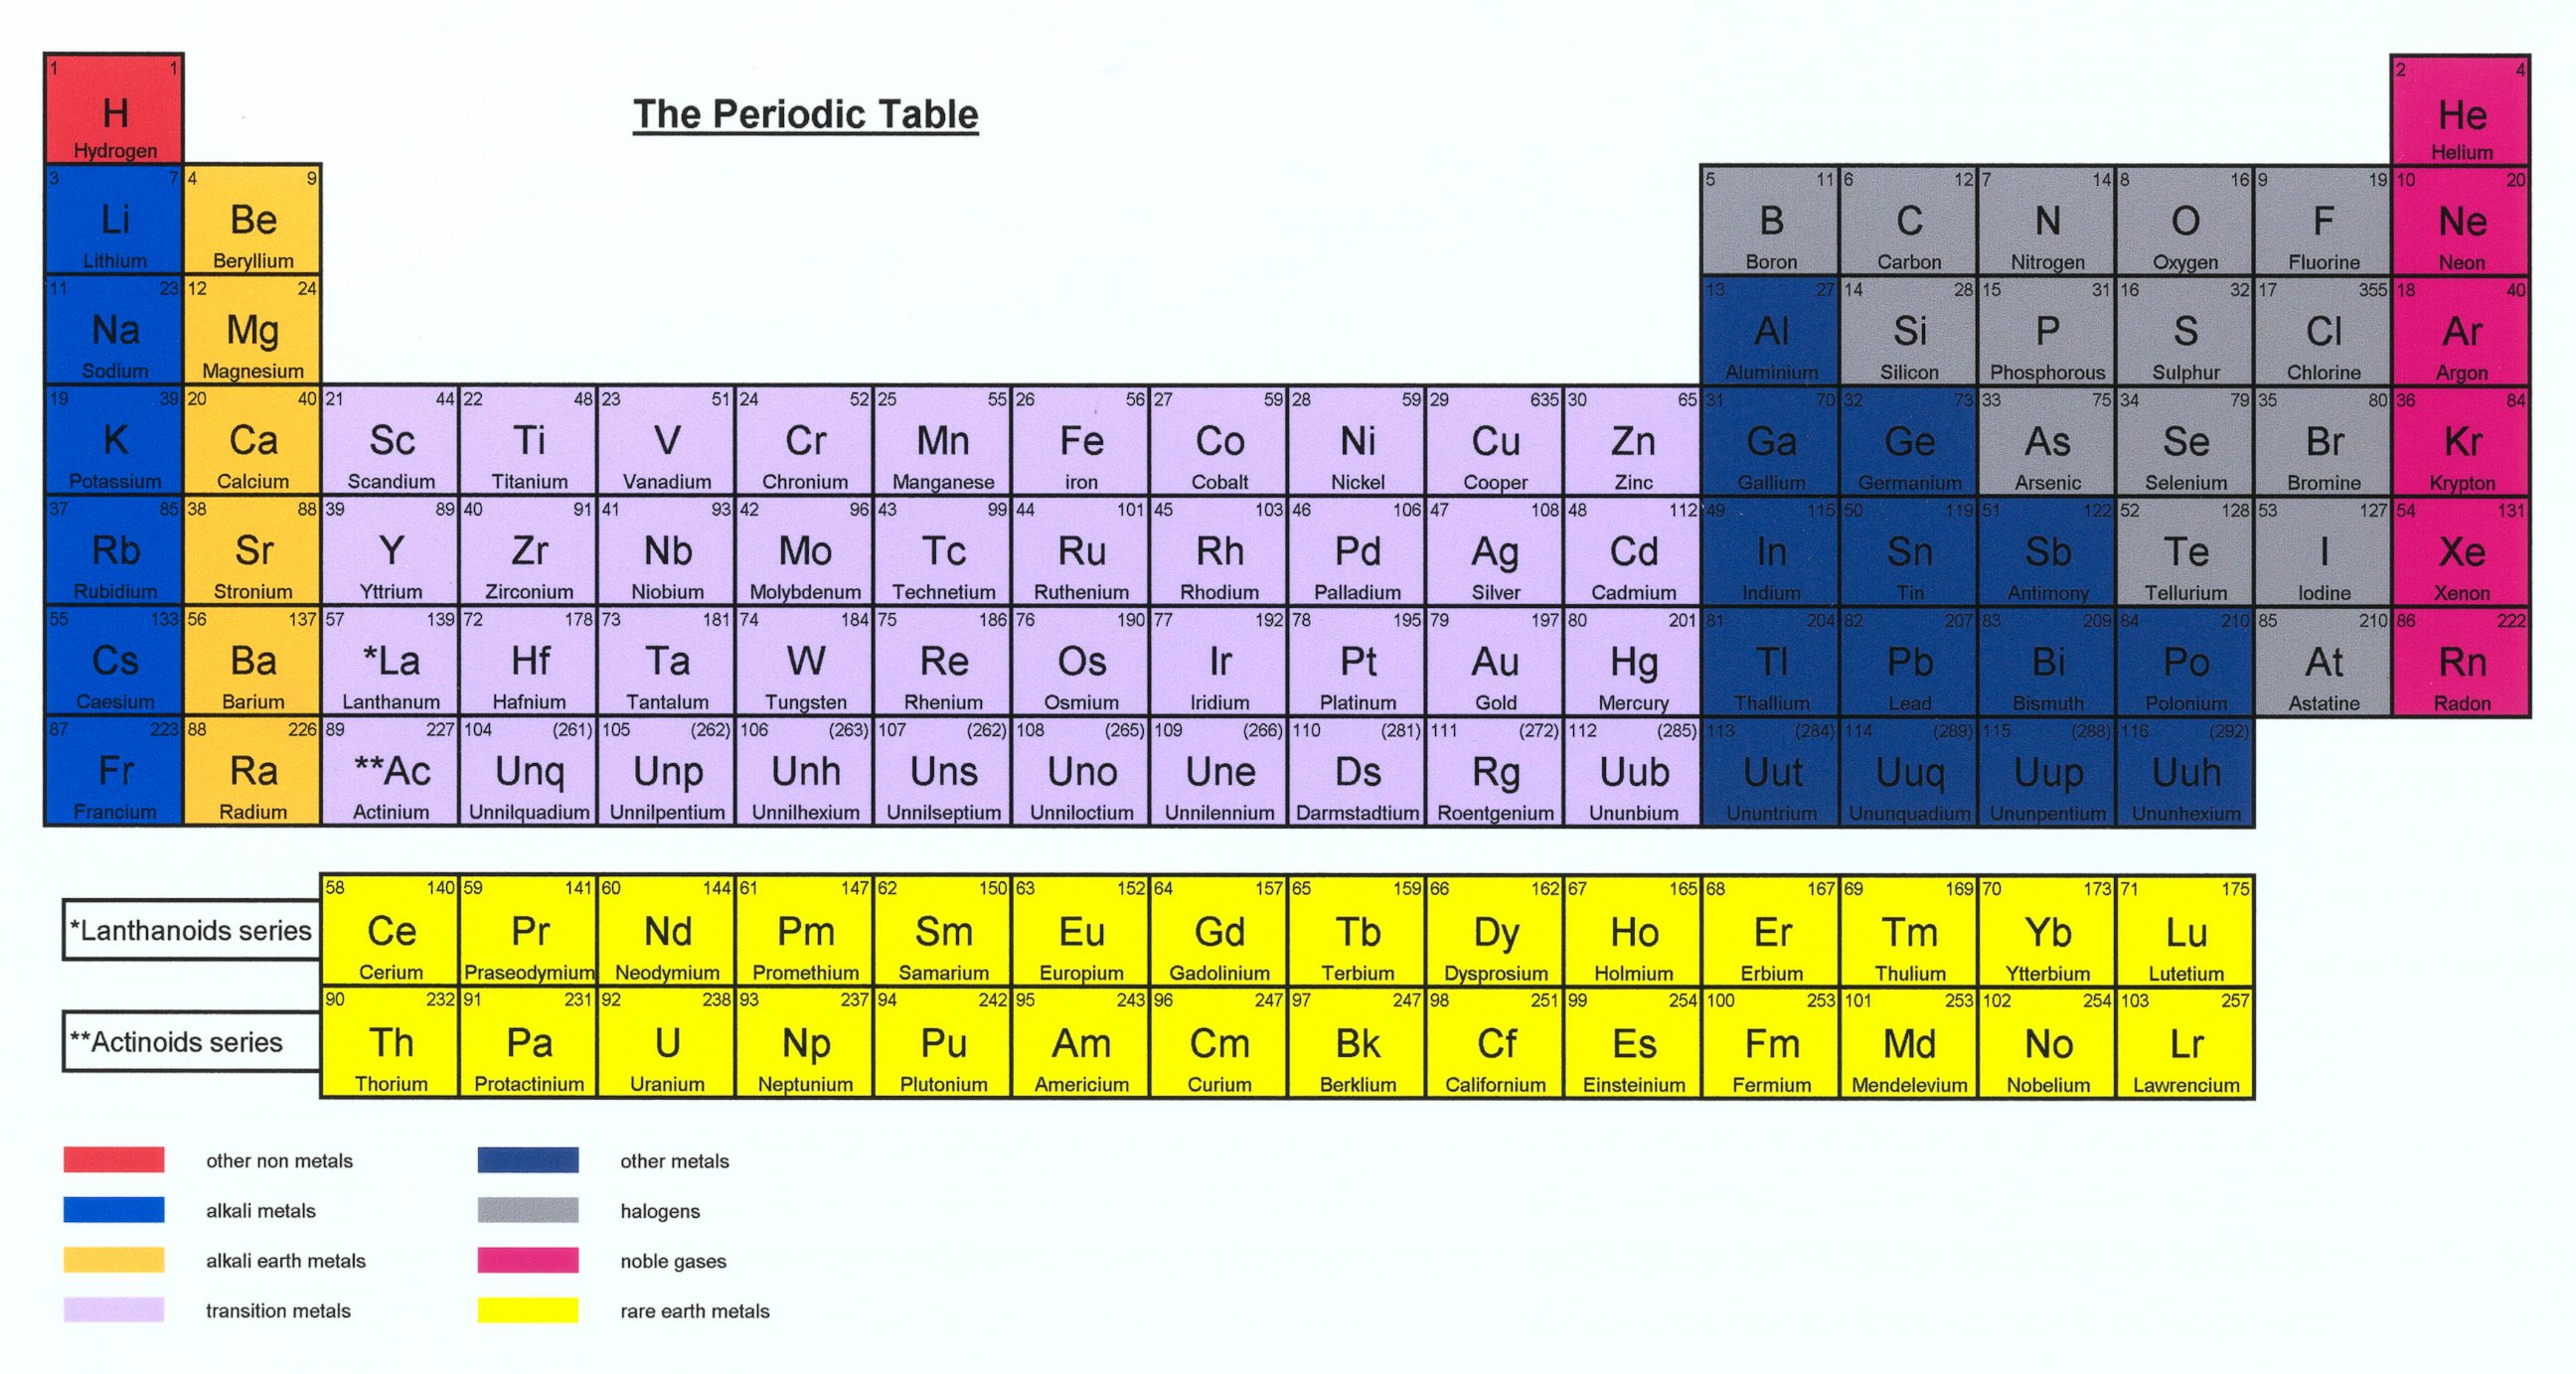 PHOTO: The Periodic Table